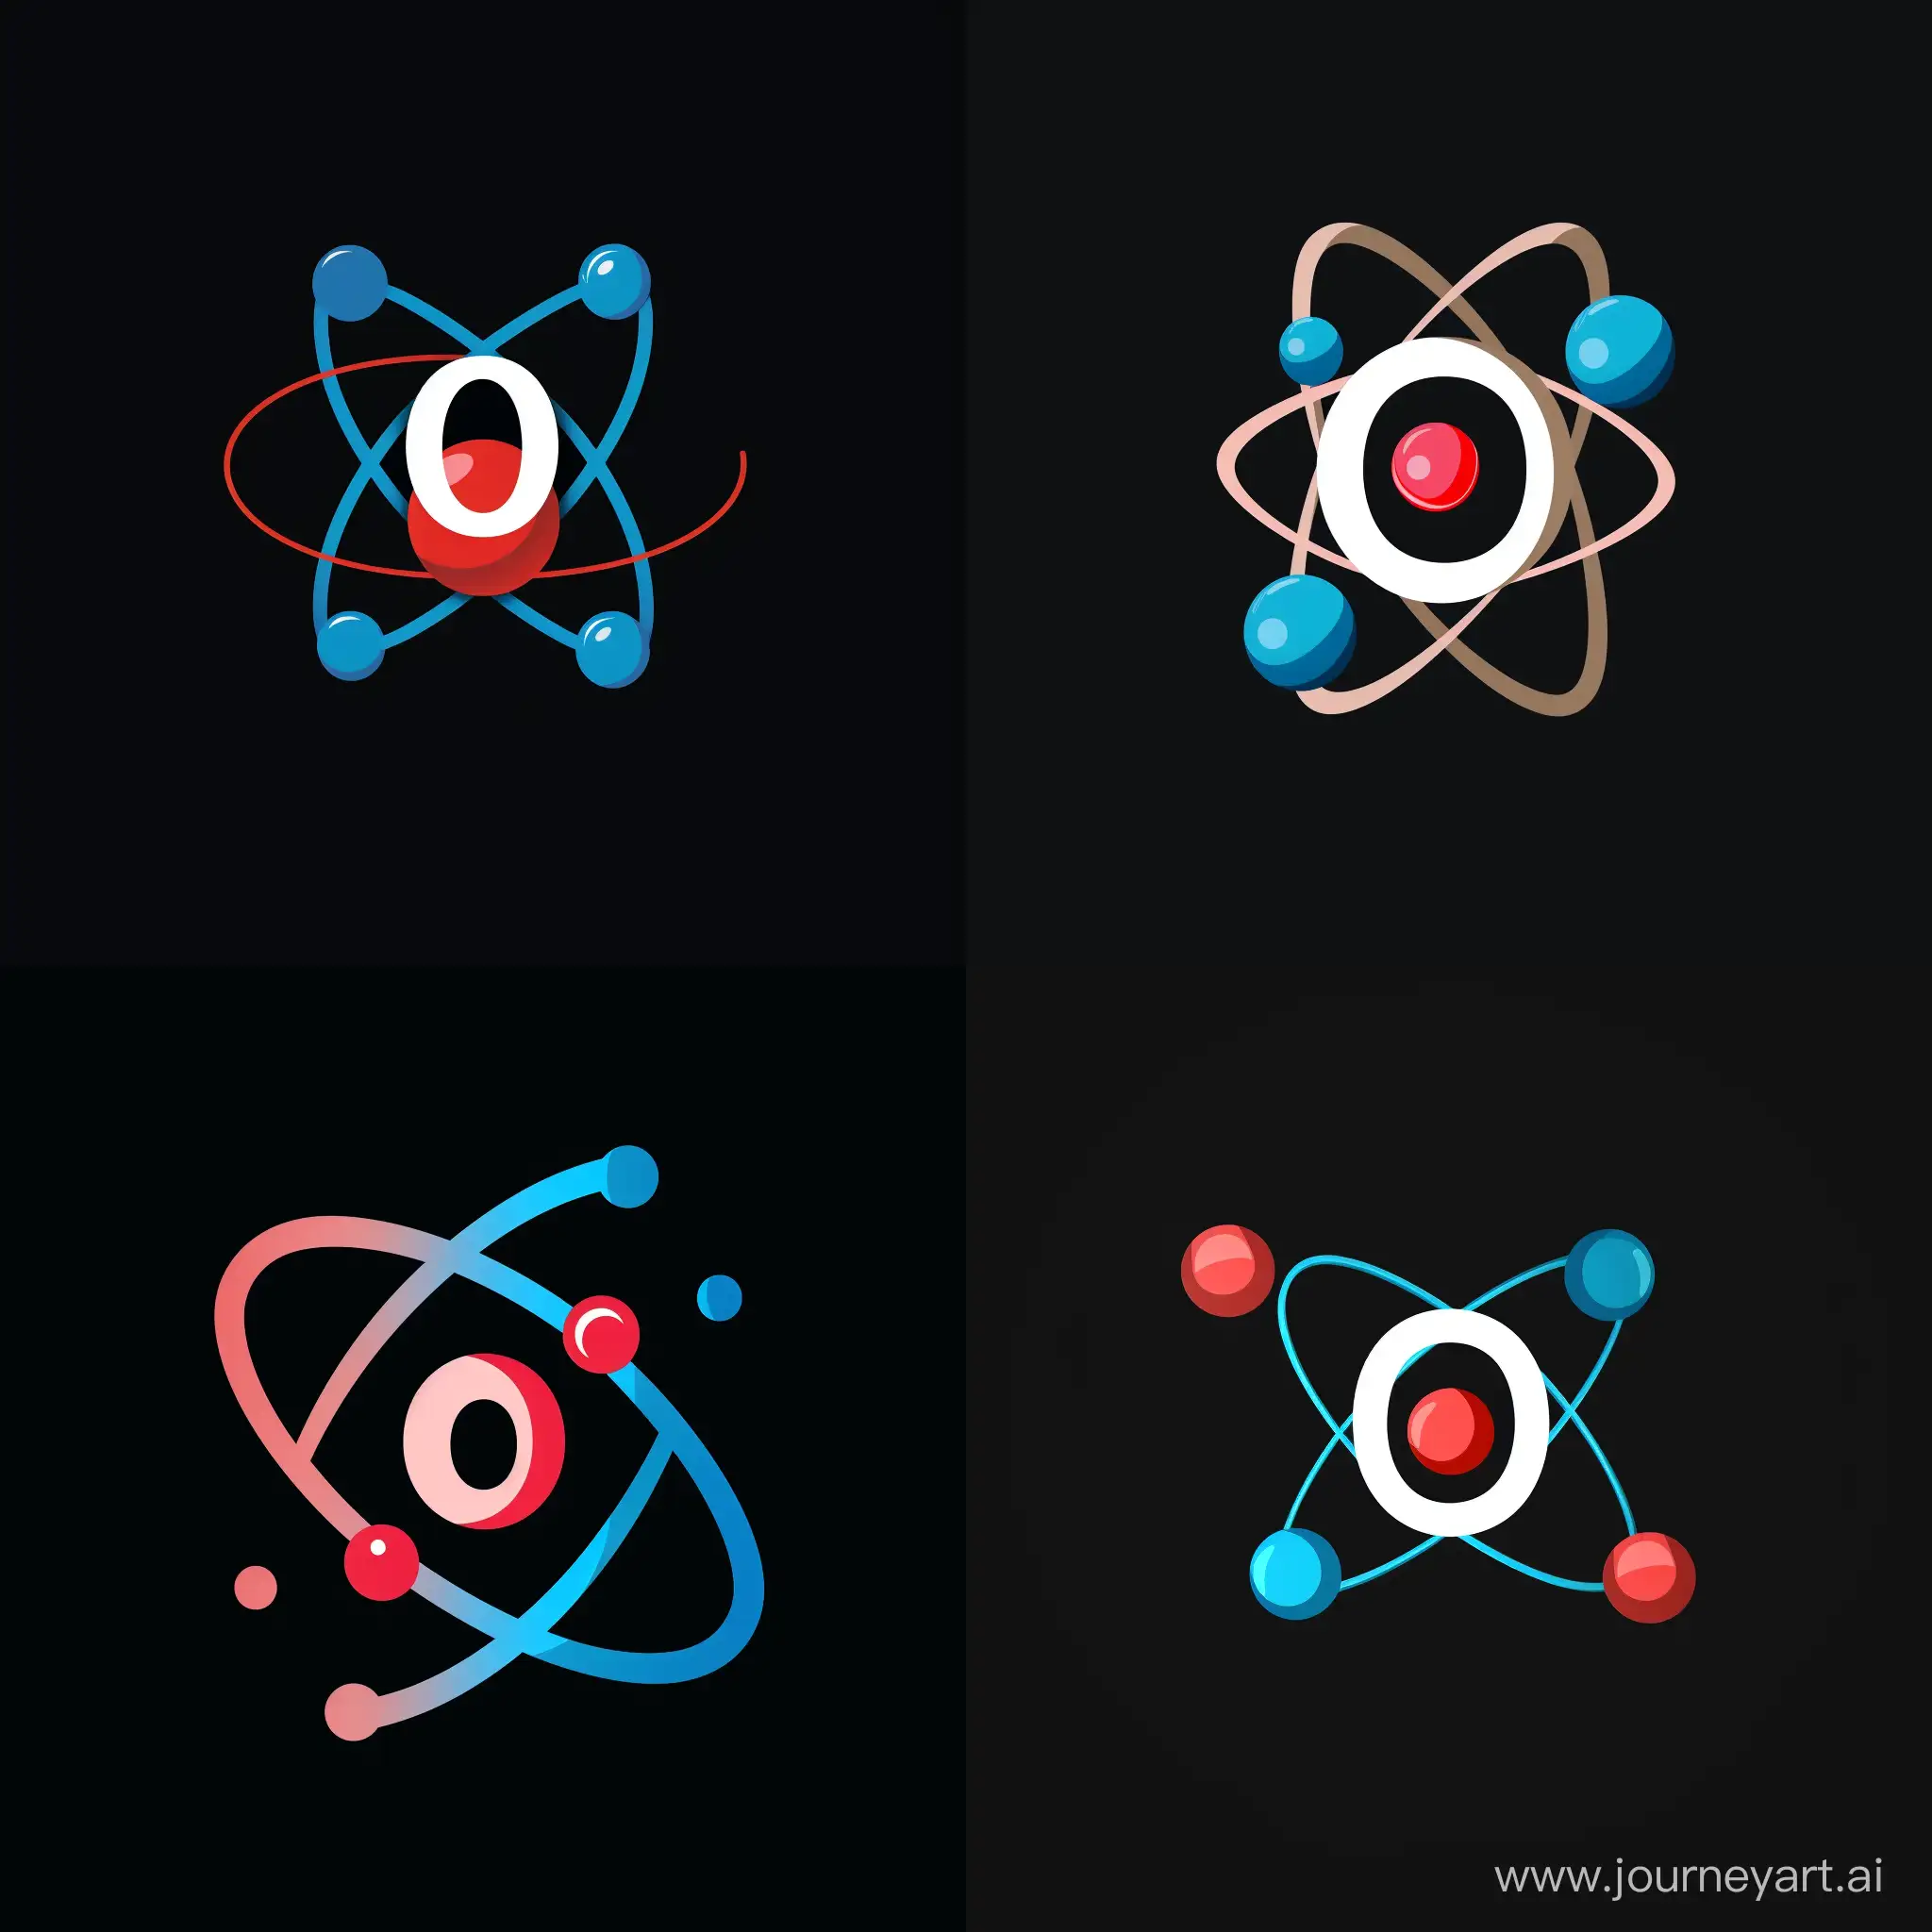 Atomic-Structure-Red-Proton-and-Blue-Electrons-in-Letter-O-Formation